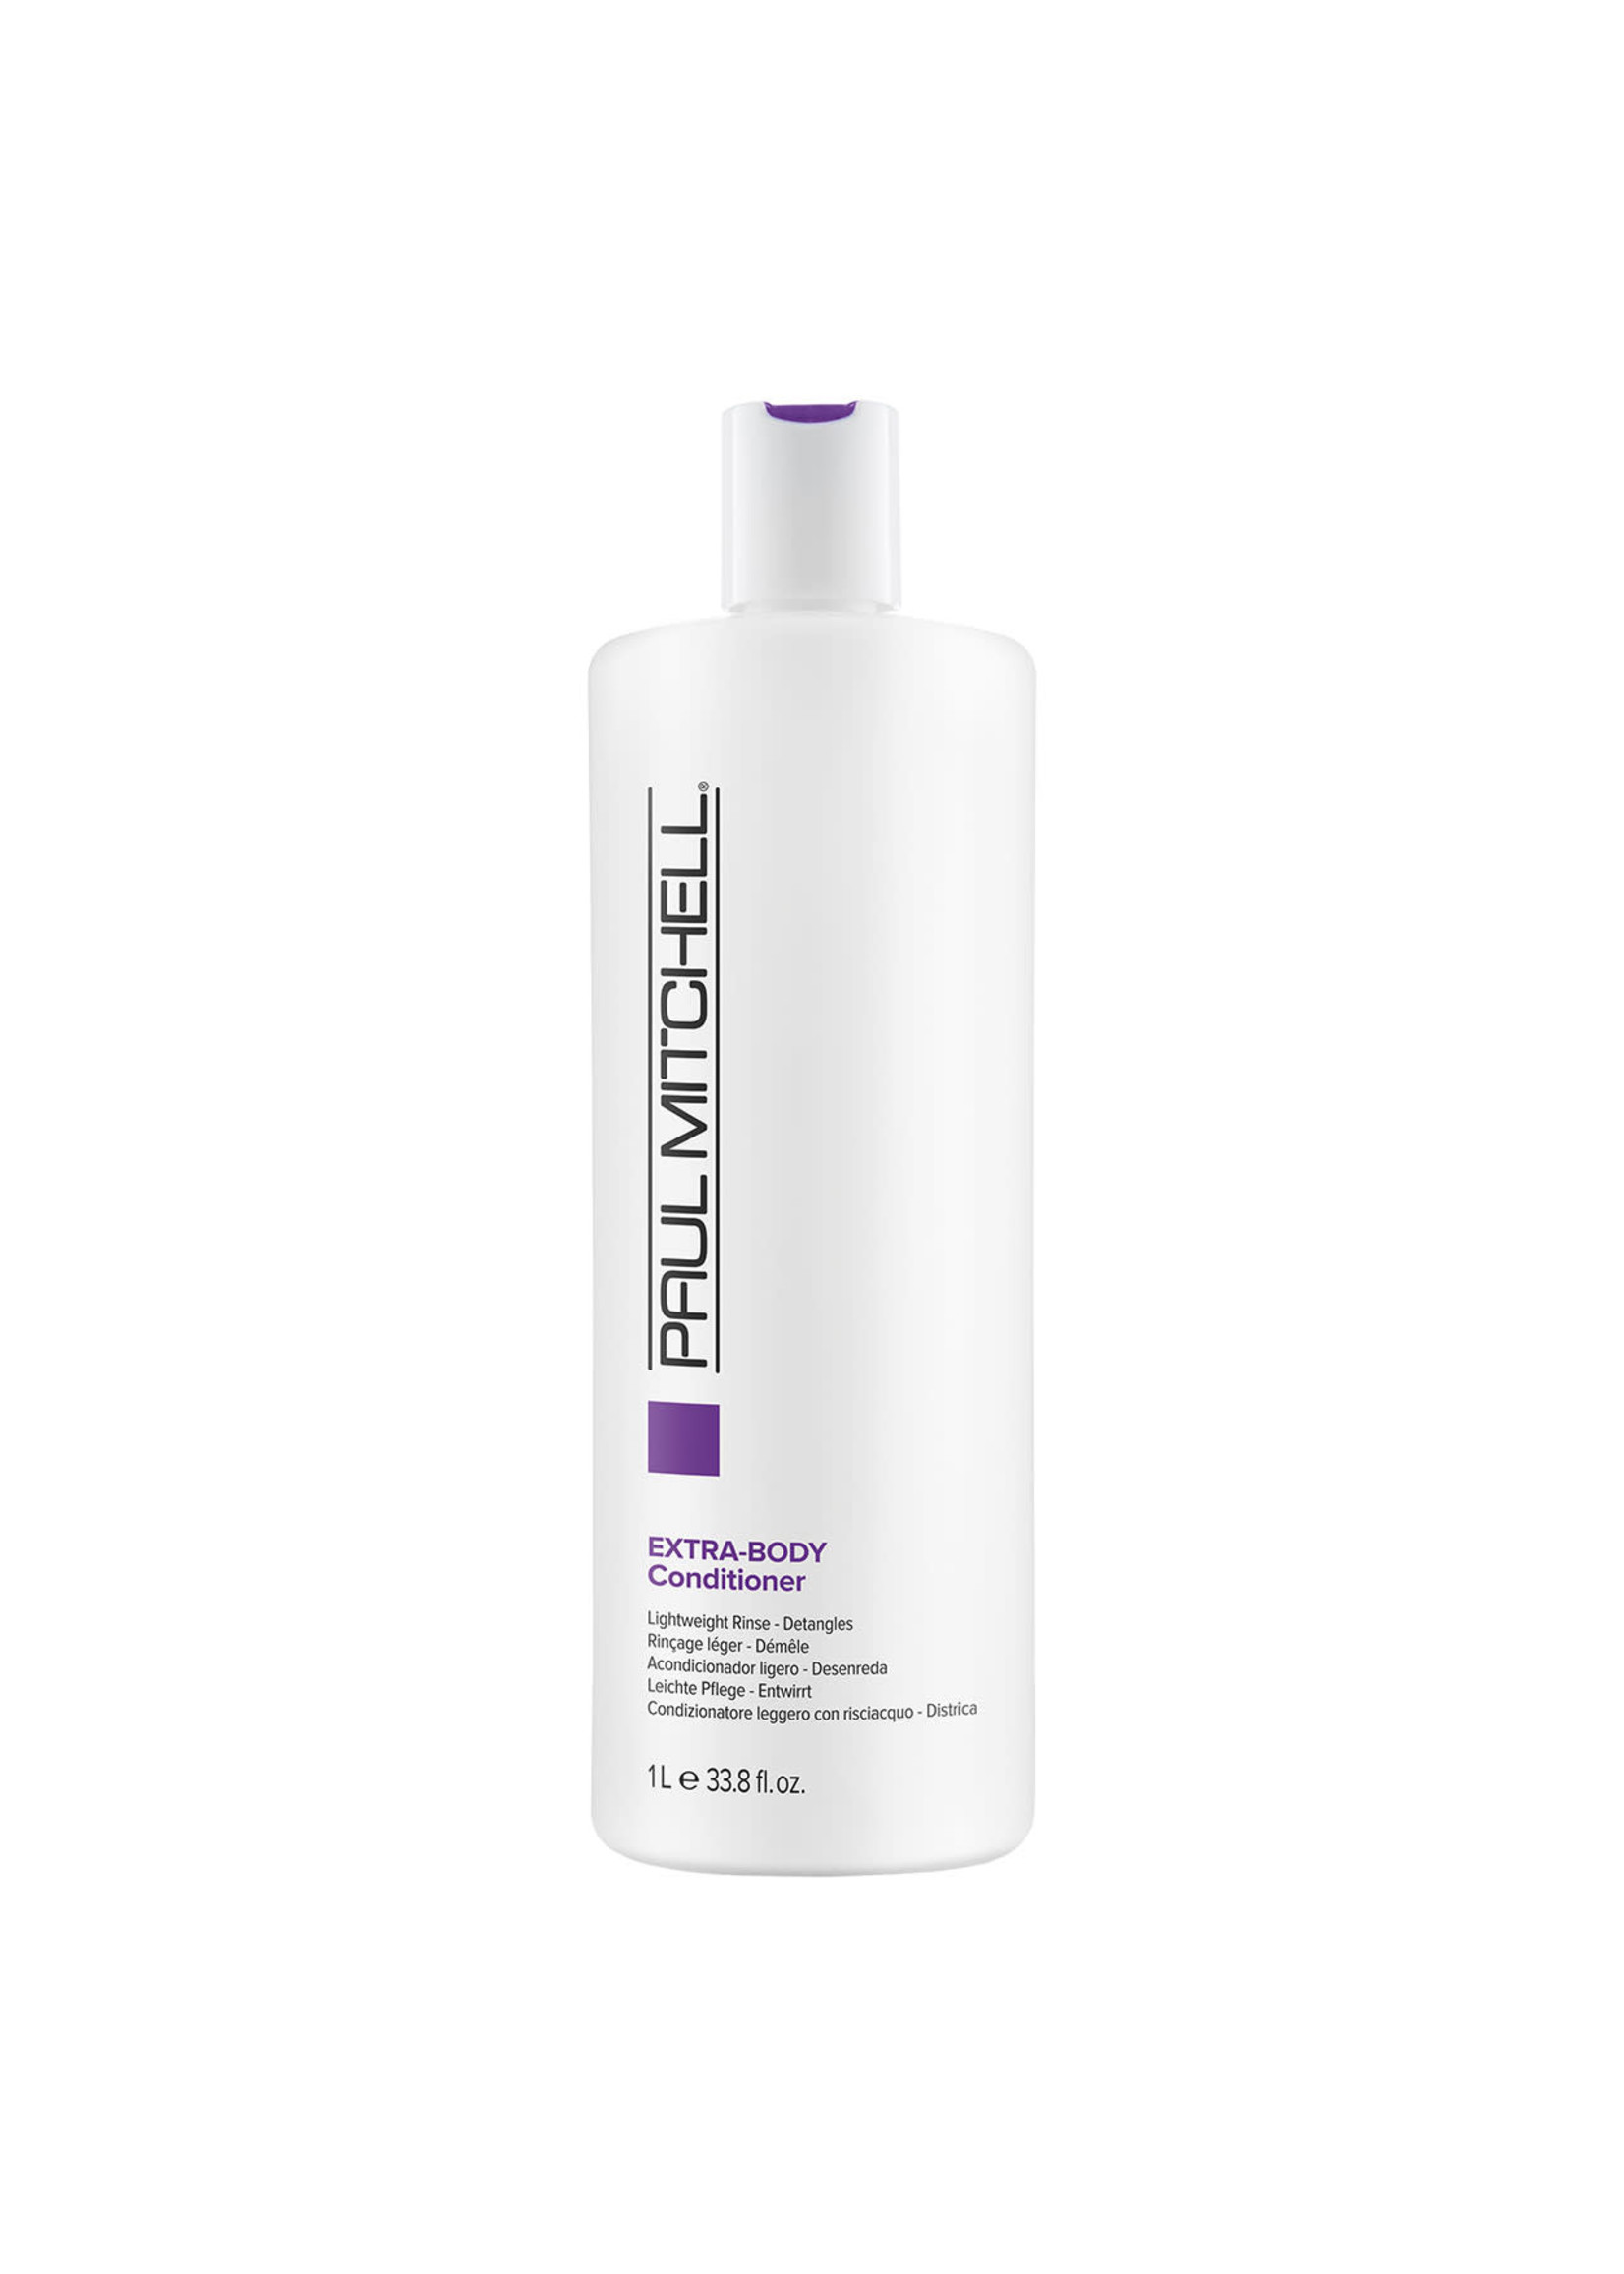 Paul Mitchell Paul Mitchell Extra-Body Conditioner 1L